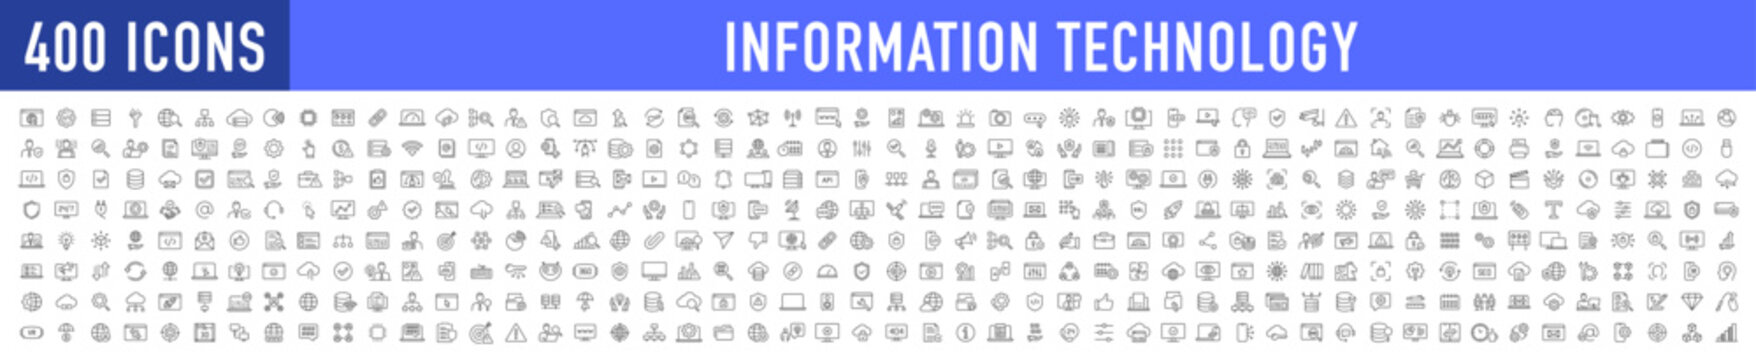 information technology web icon set in line style. network, web design, website, computer, software,